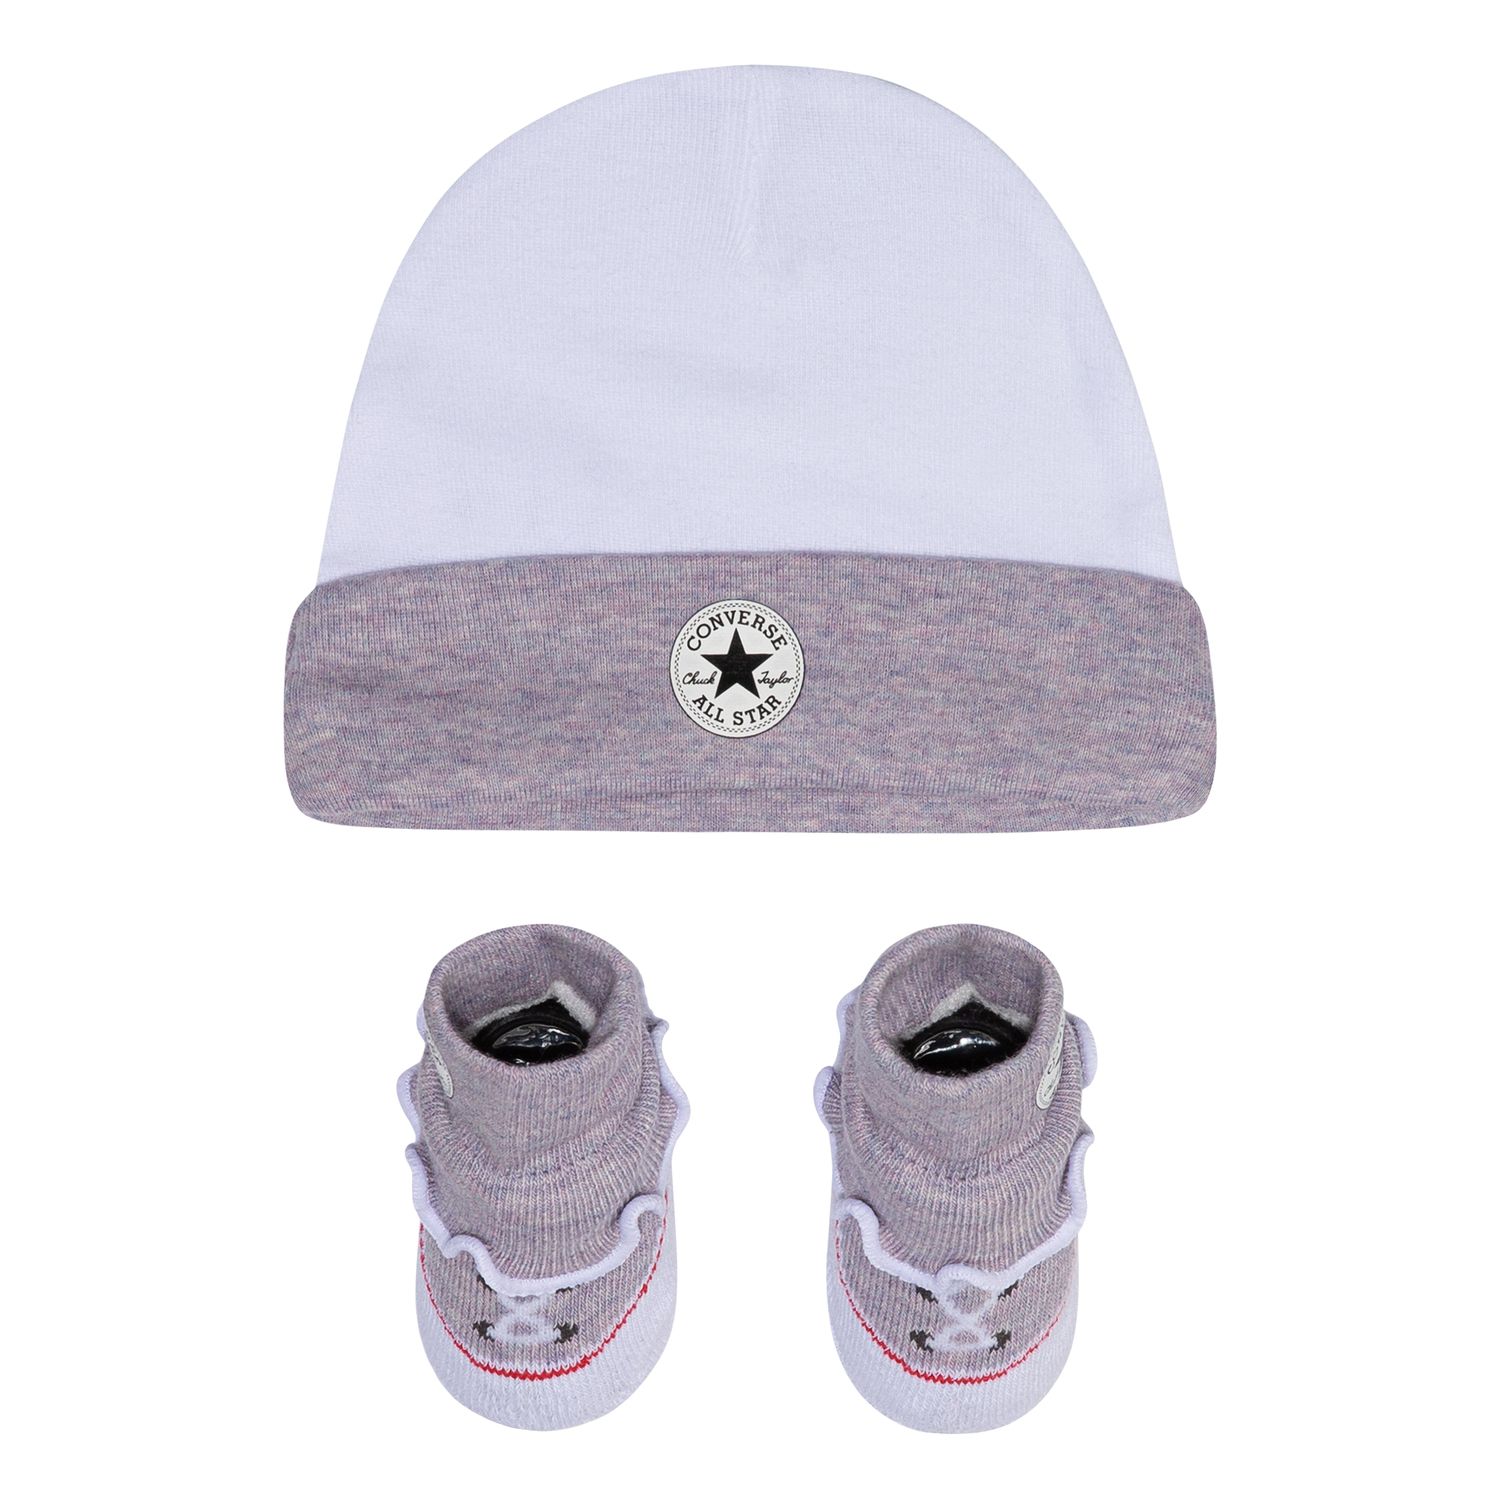 converse baby hat and socks